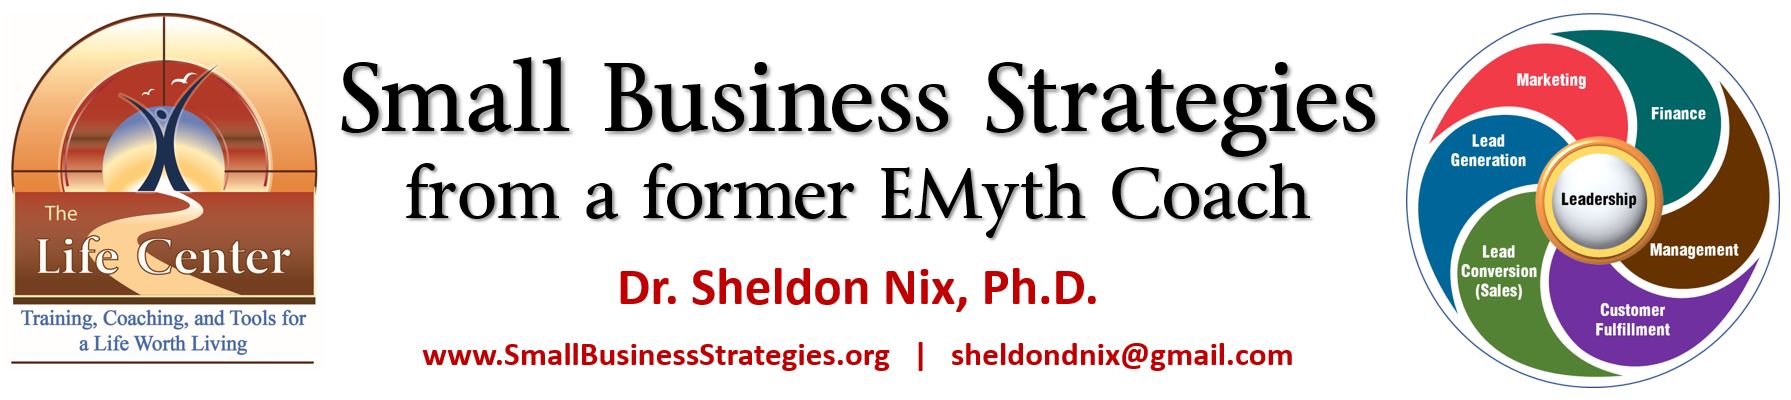 Small Business Strategies by an EMyth Coach